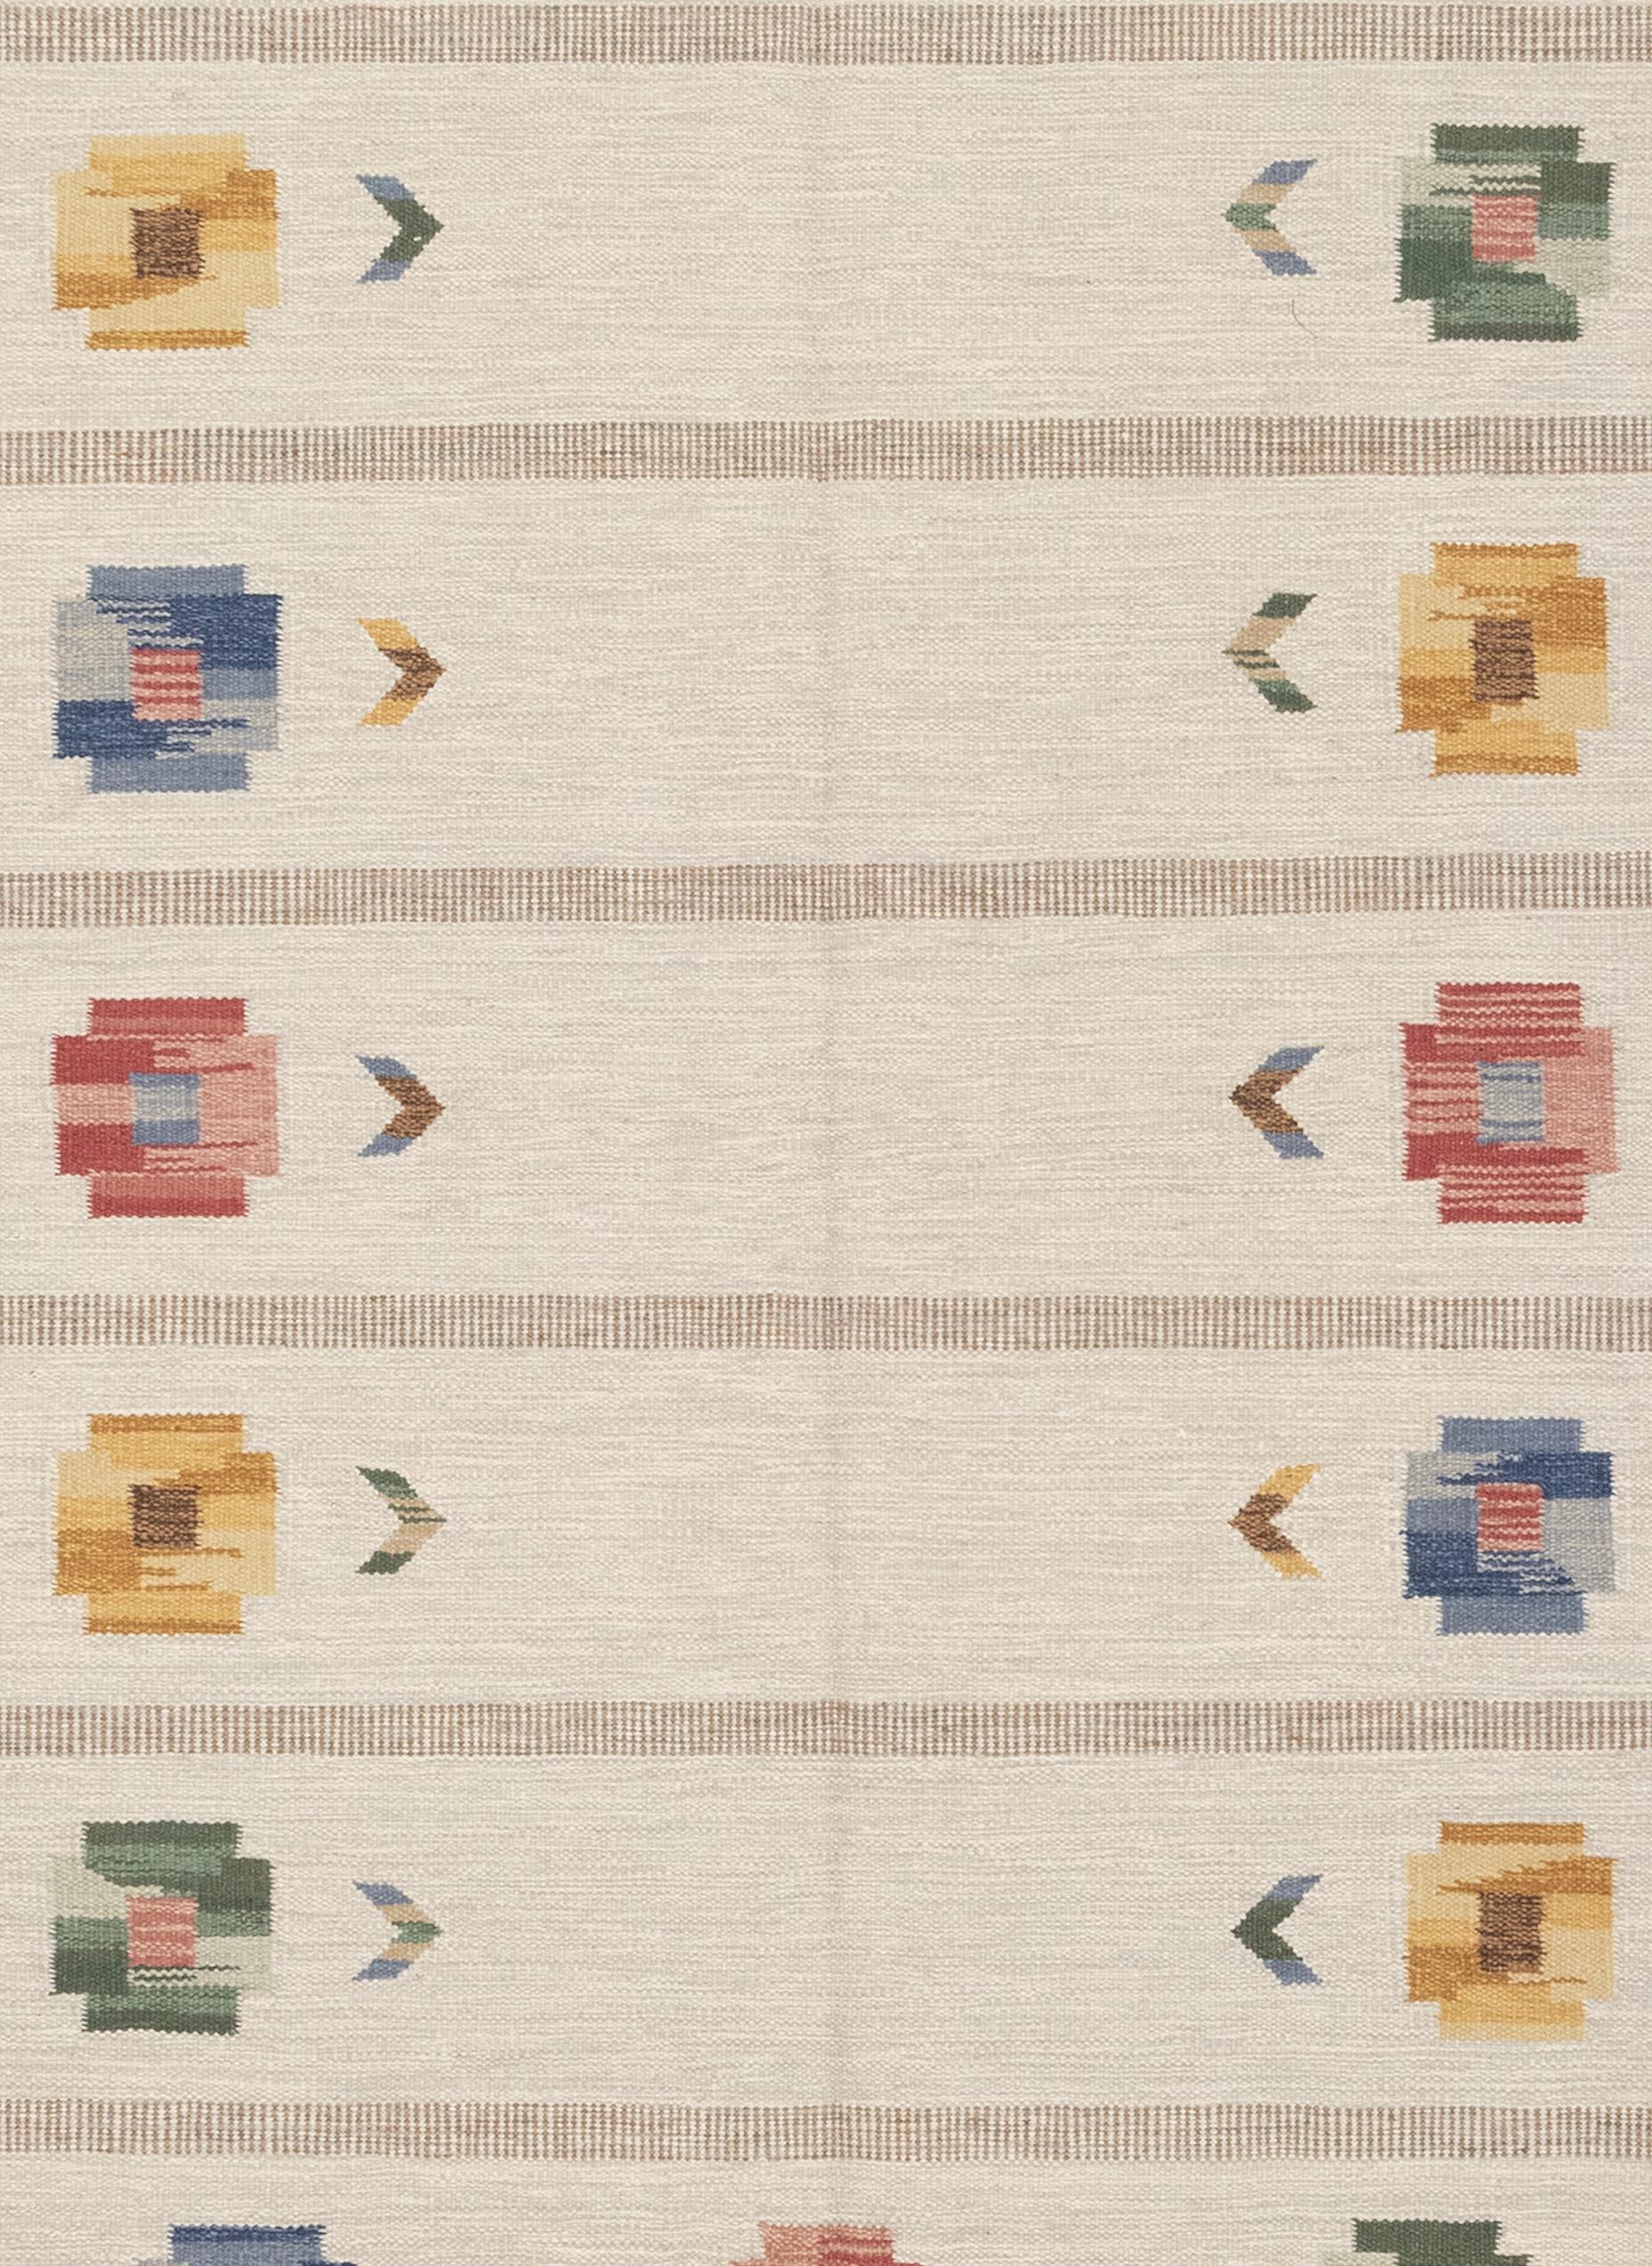 This is a vintage Scandinavian Kilim rug woven circa 1950s with quite a beautiful composition. It features an elegant display of floral motifs placed on the perimeter, like a wreath of pansies. A subdued background of gray blocks with bands of